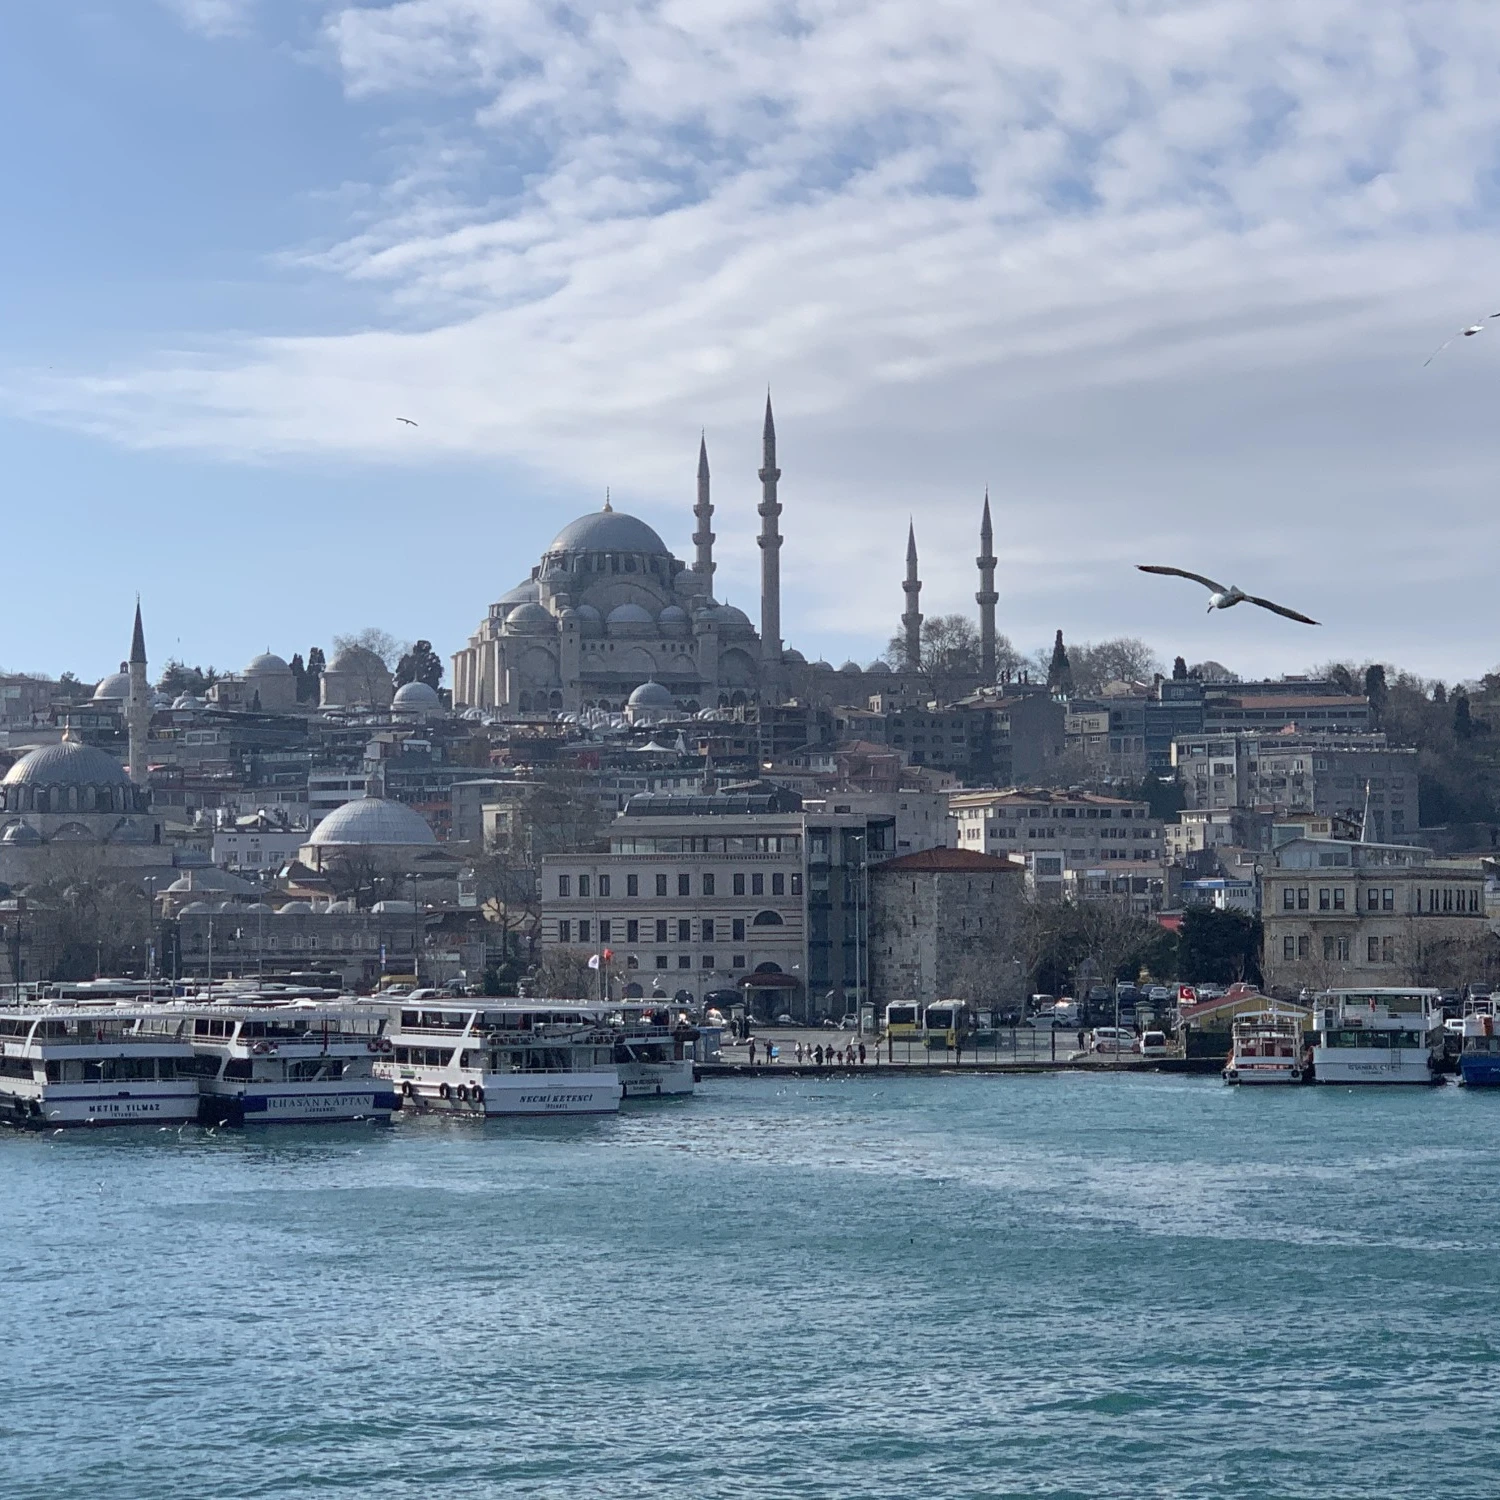 A domed building with minarets overlooks a busy harbor.